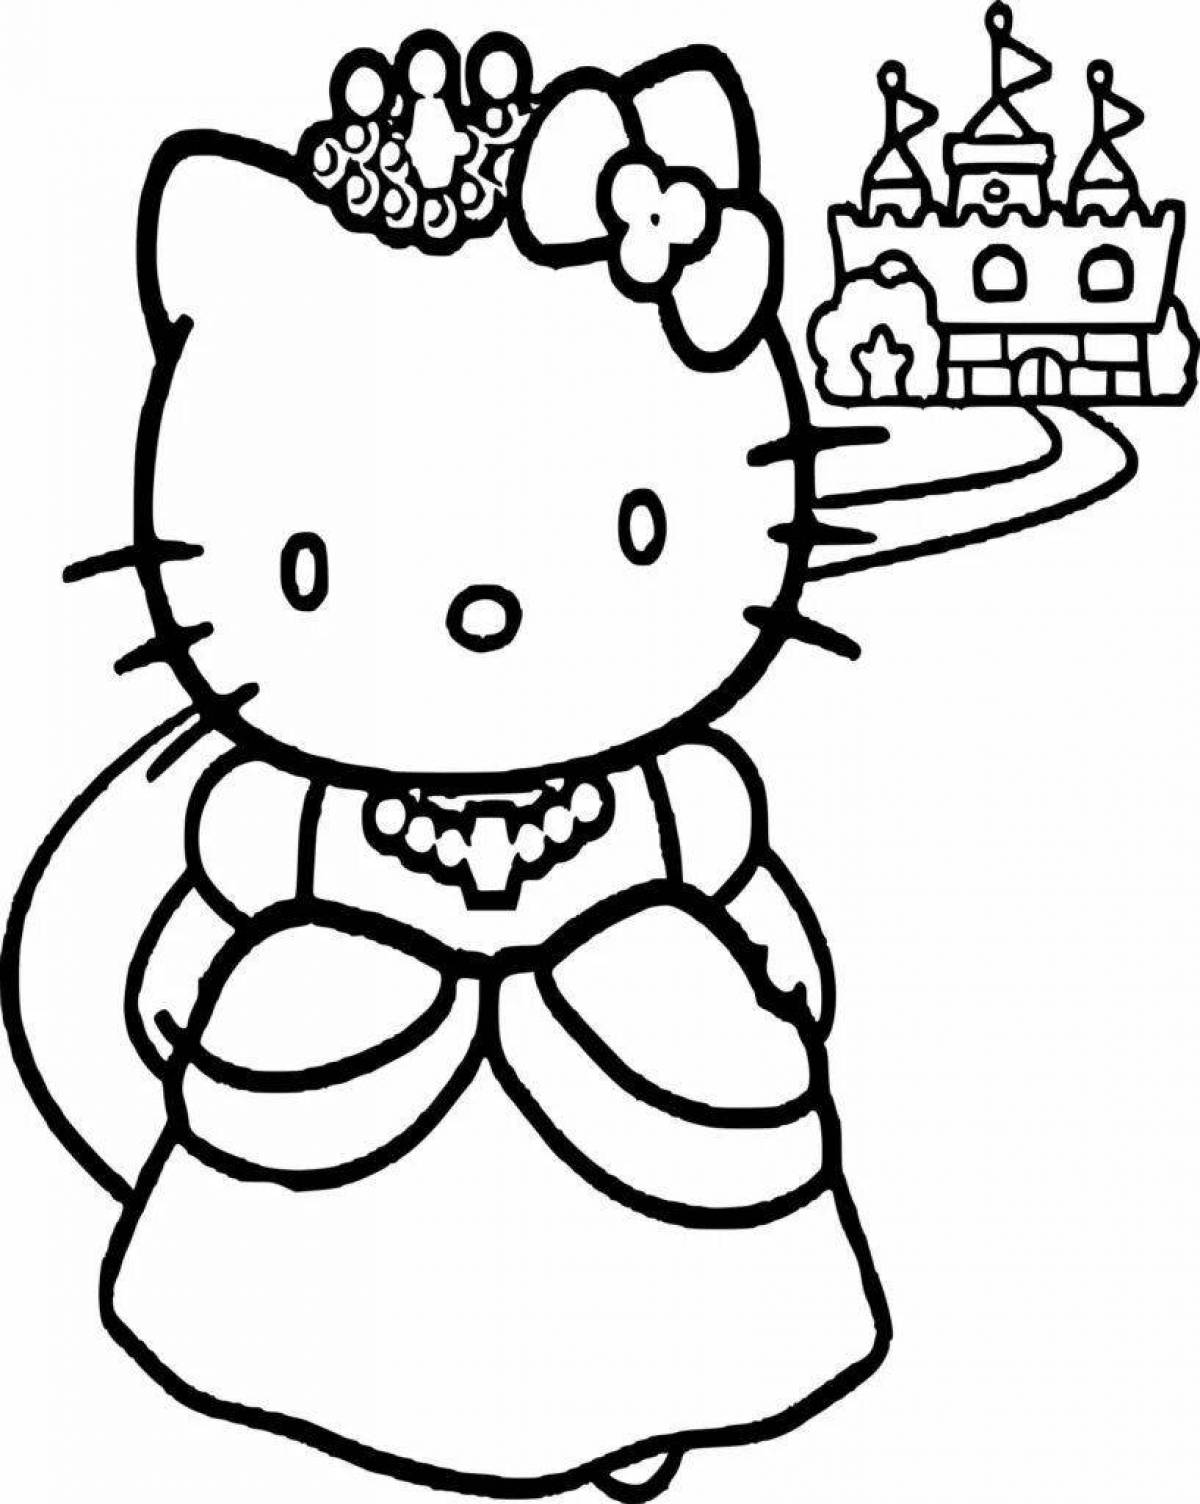 Cathy shining coloring page